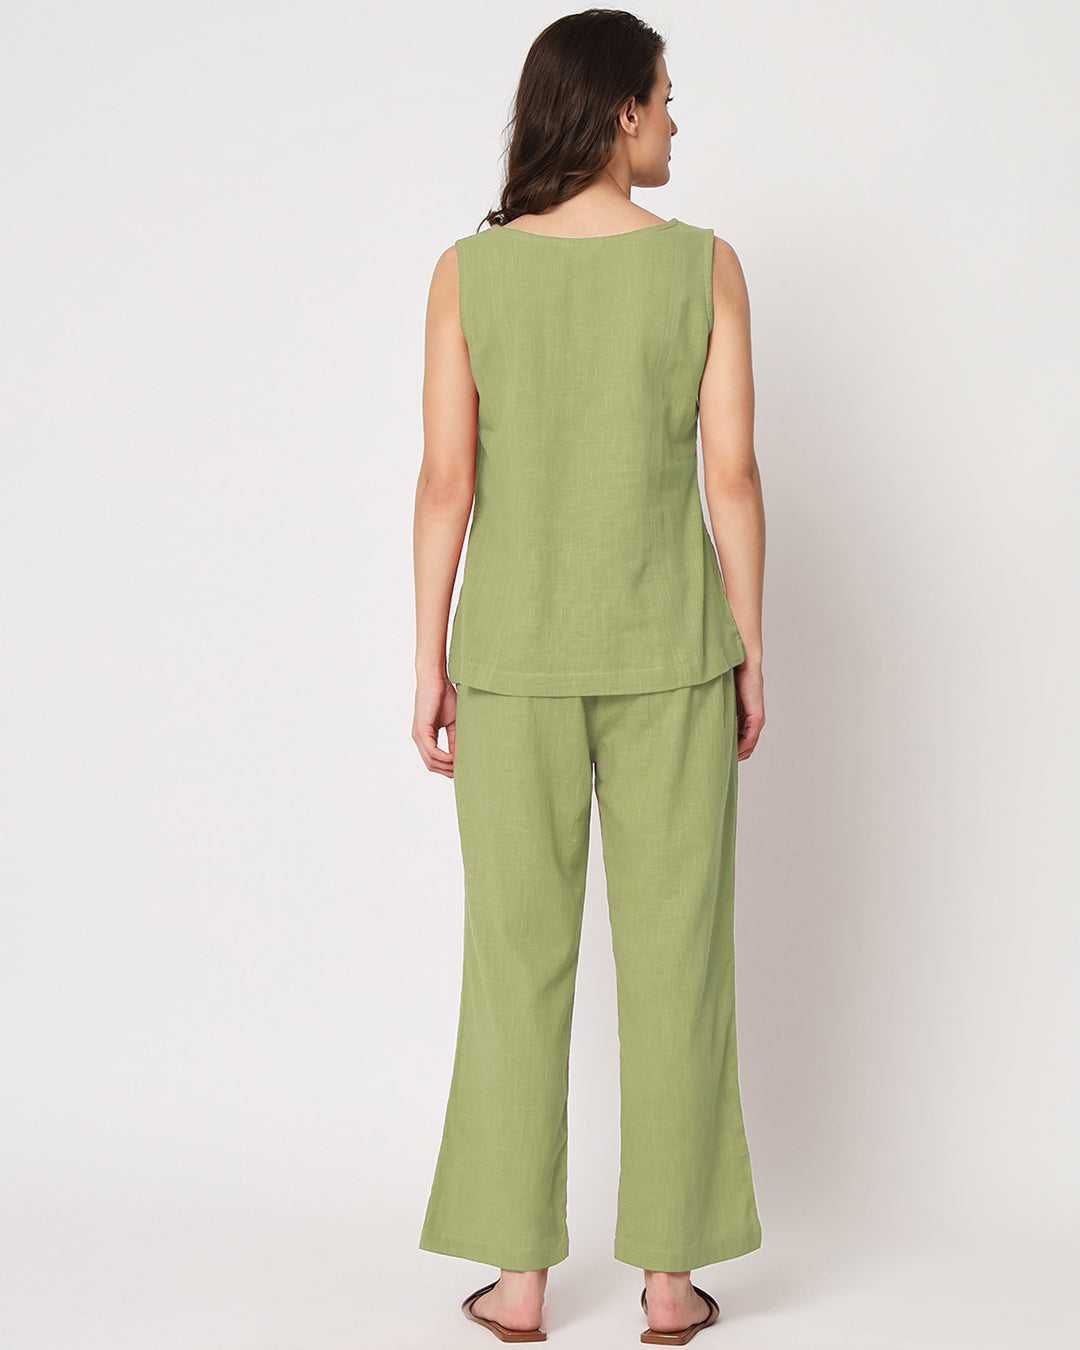 Sage Green Sleeveless Short Length Solid Top (Without Bottoms)